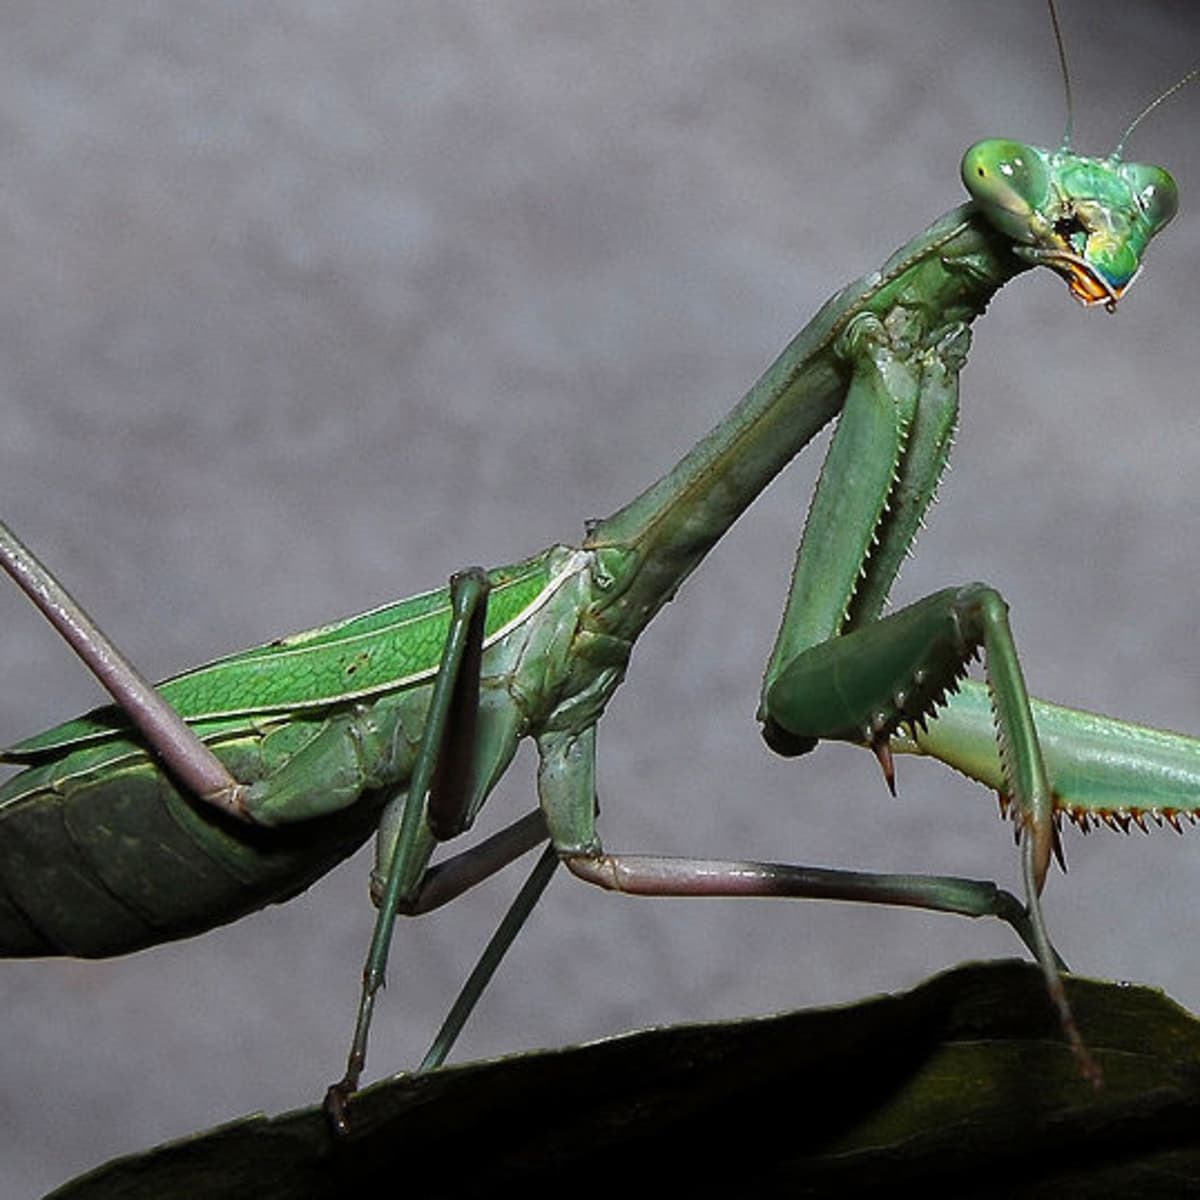 WHAT DO YOU DO WHEN A GIANT PRAYING MANTIS ALIGHTS NEAR YOUR WRITING DESK |  The Black Narcissus